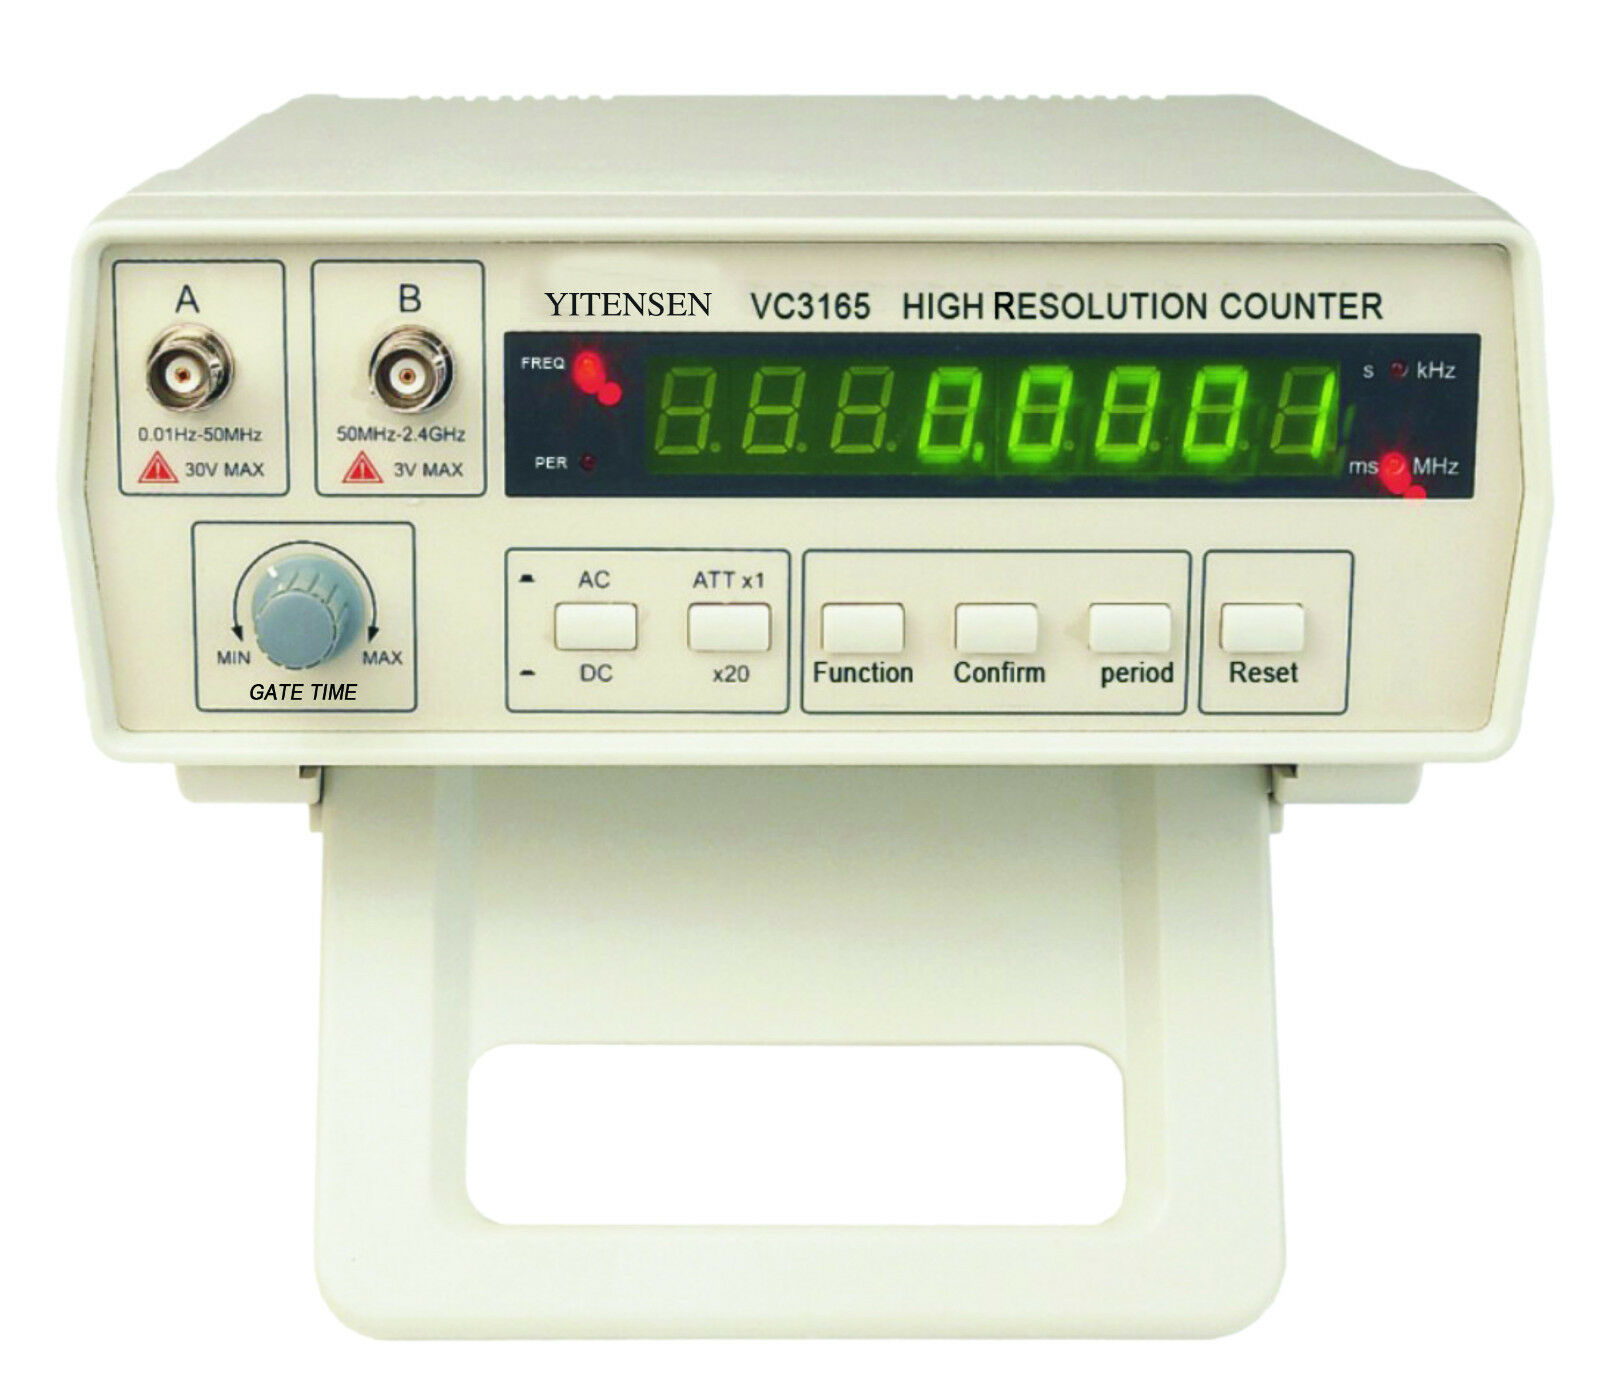 1 New Yitensen-pakrite(r) High Resolution Frequency Counter W/probe Vc3165, Usa